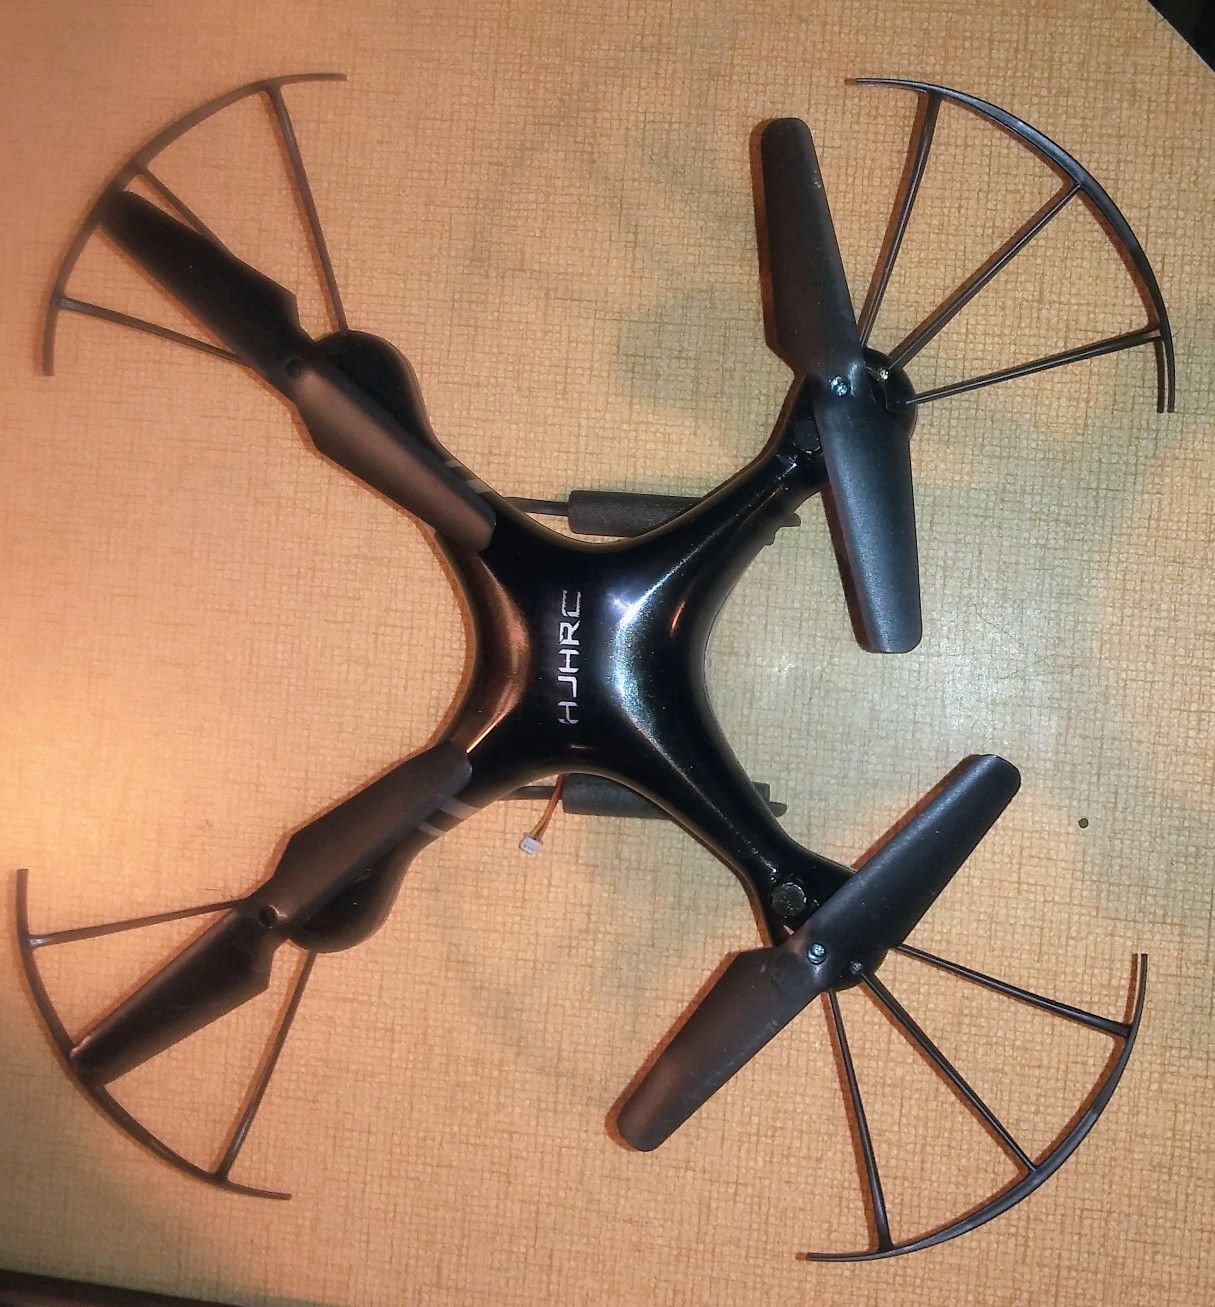 Drone:HJHRC, With movie camera and still pictures